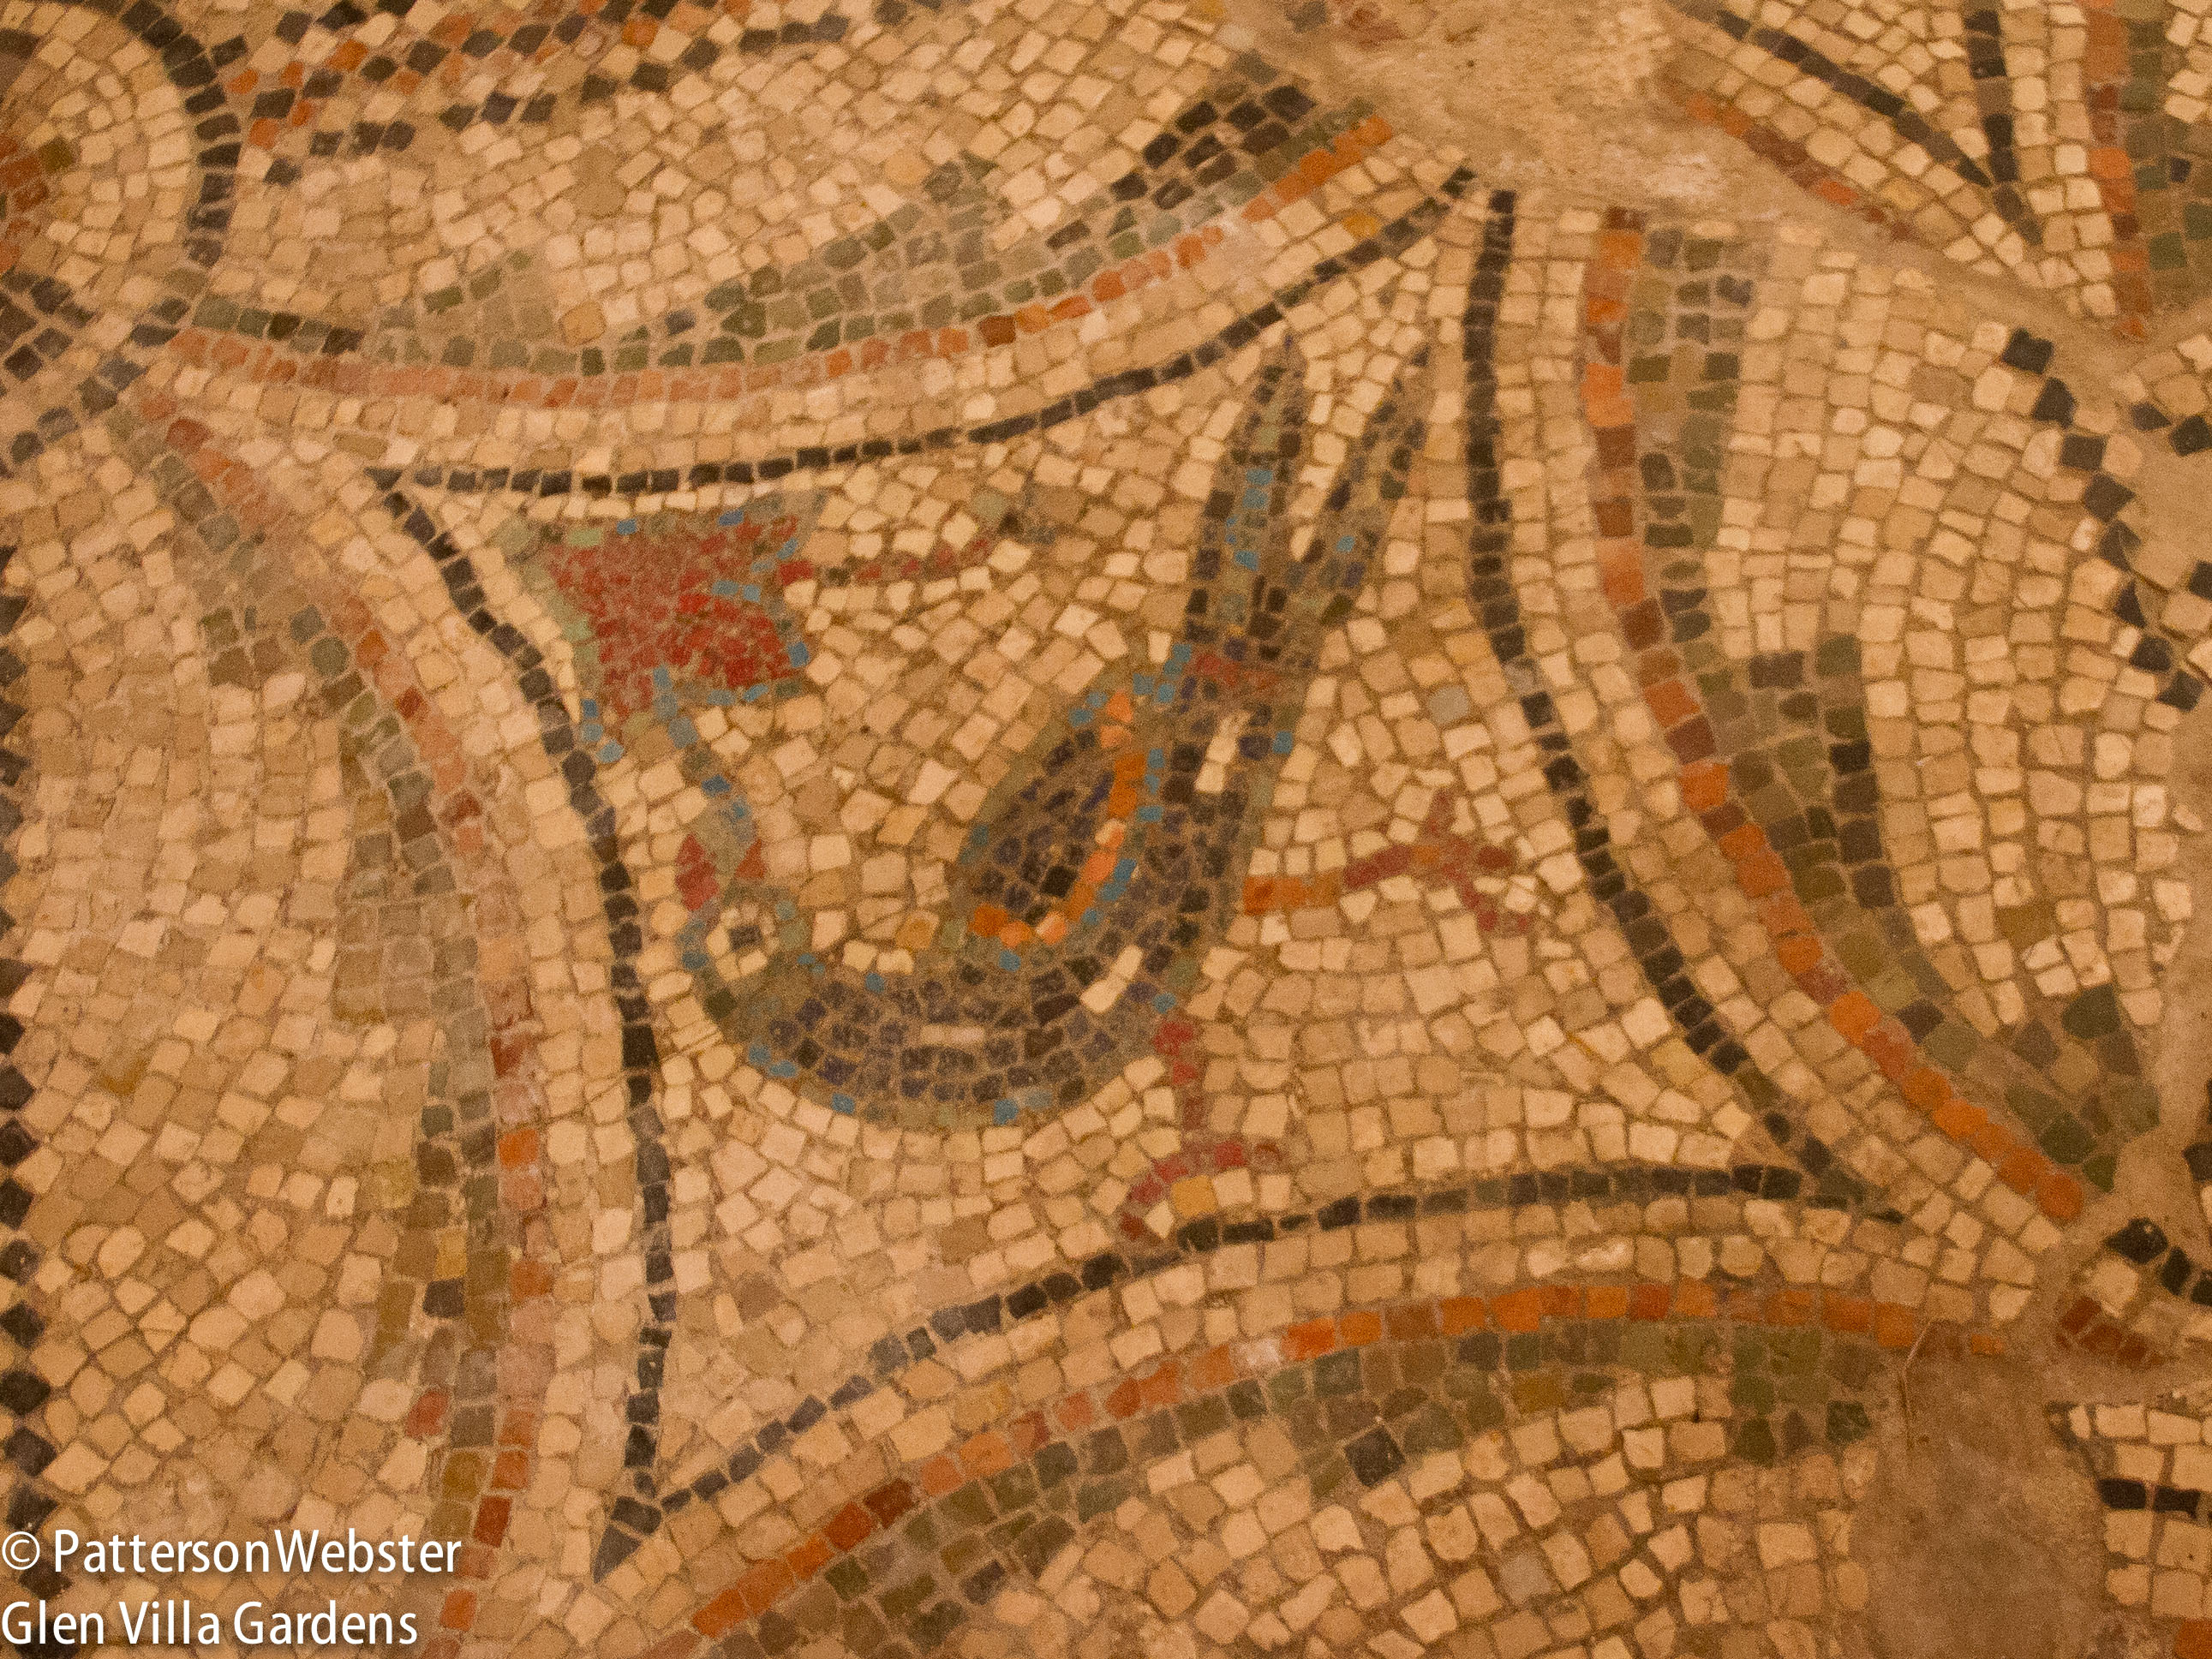 Another floor mosaic, formerly at S. Apollinare in Classe.